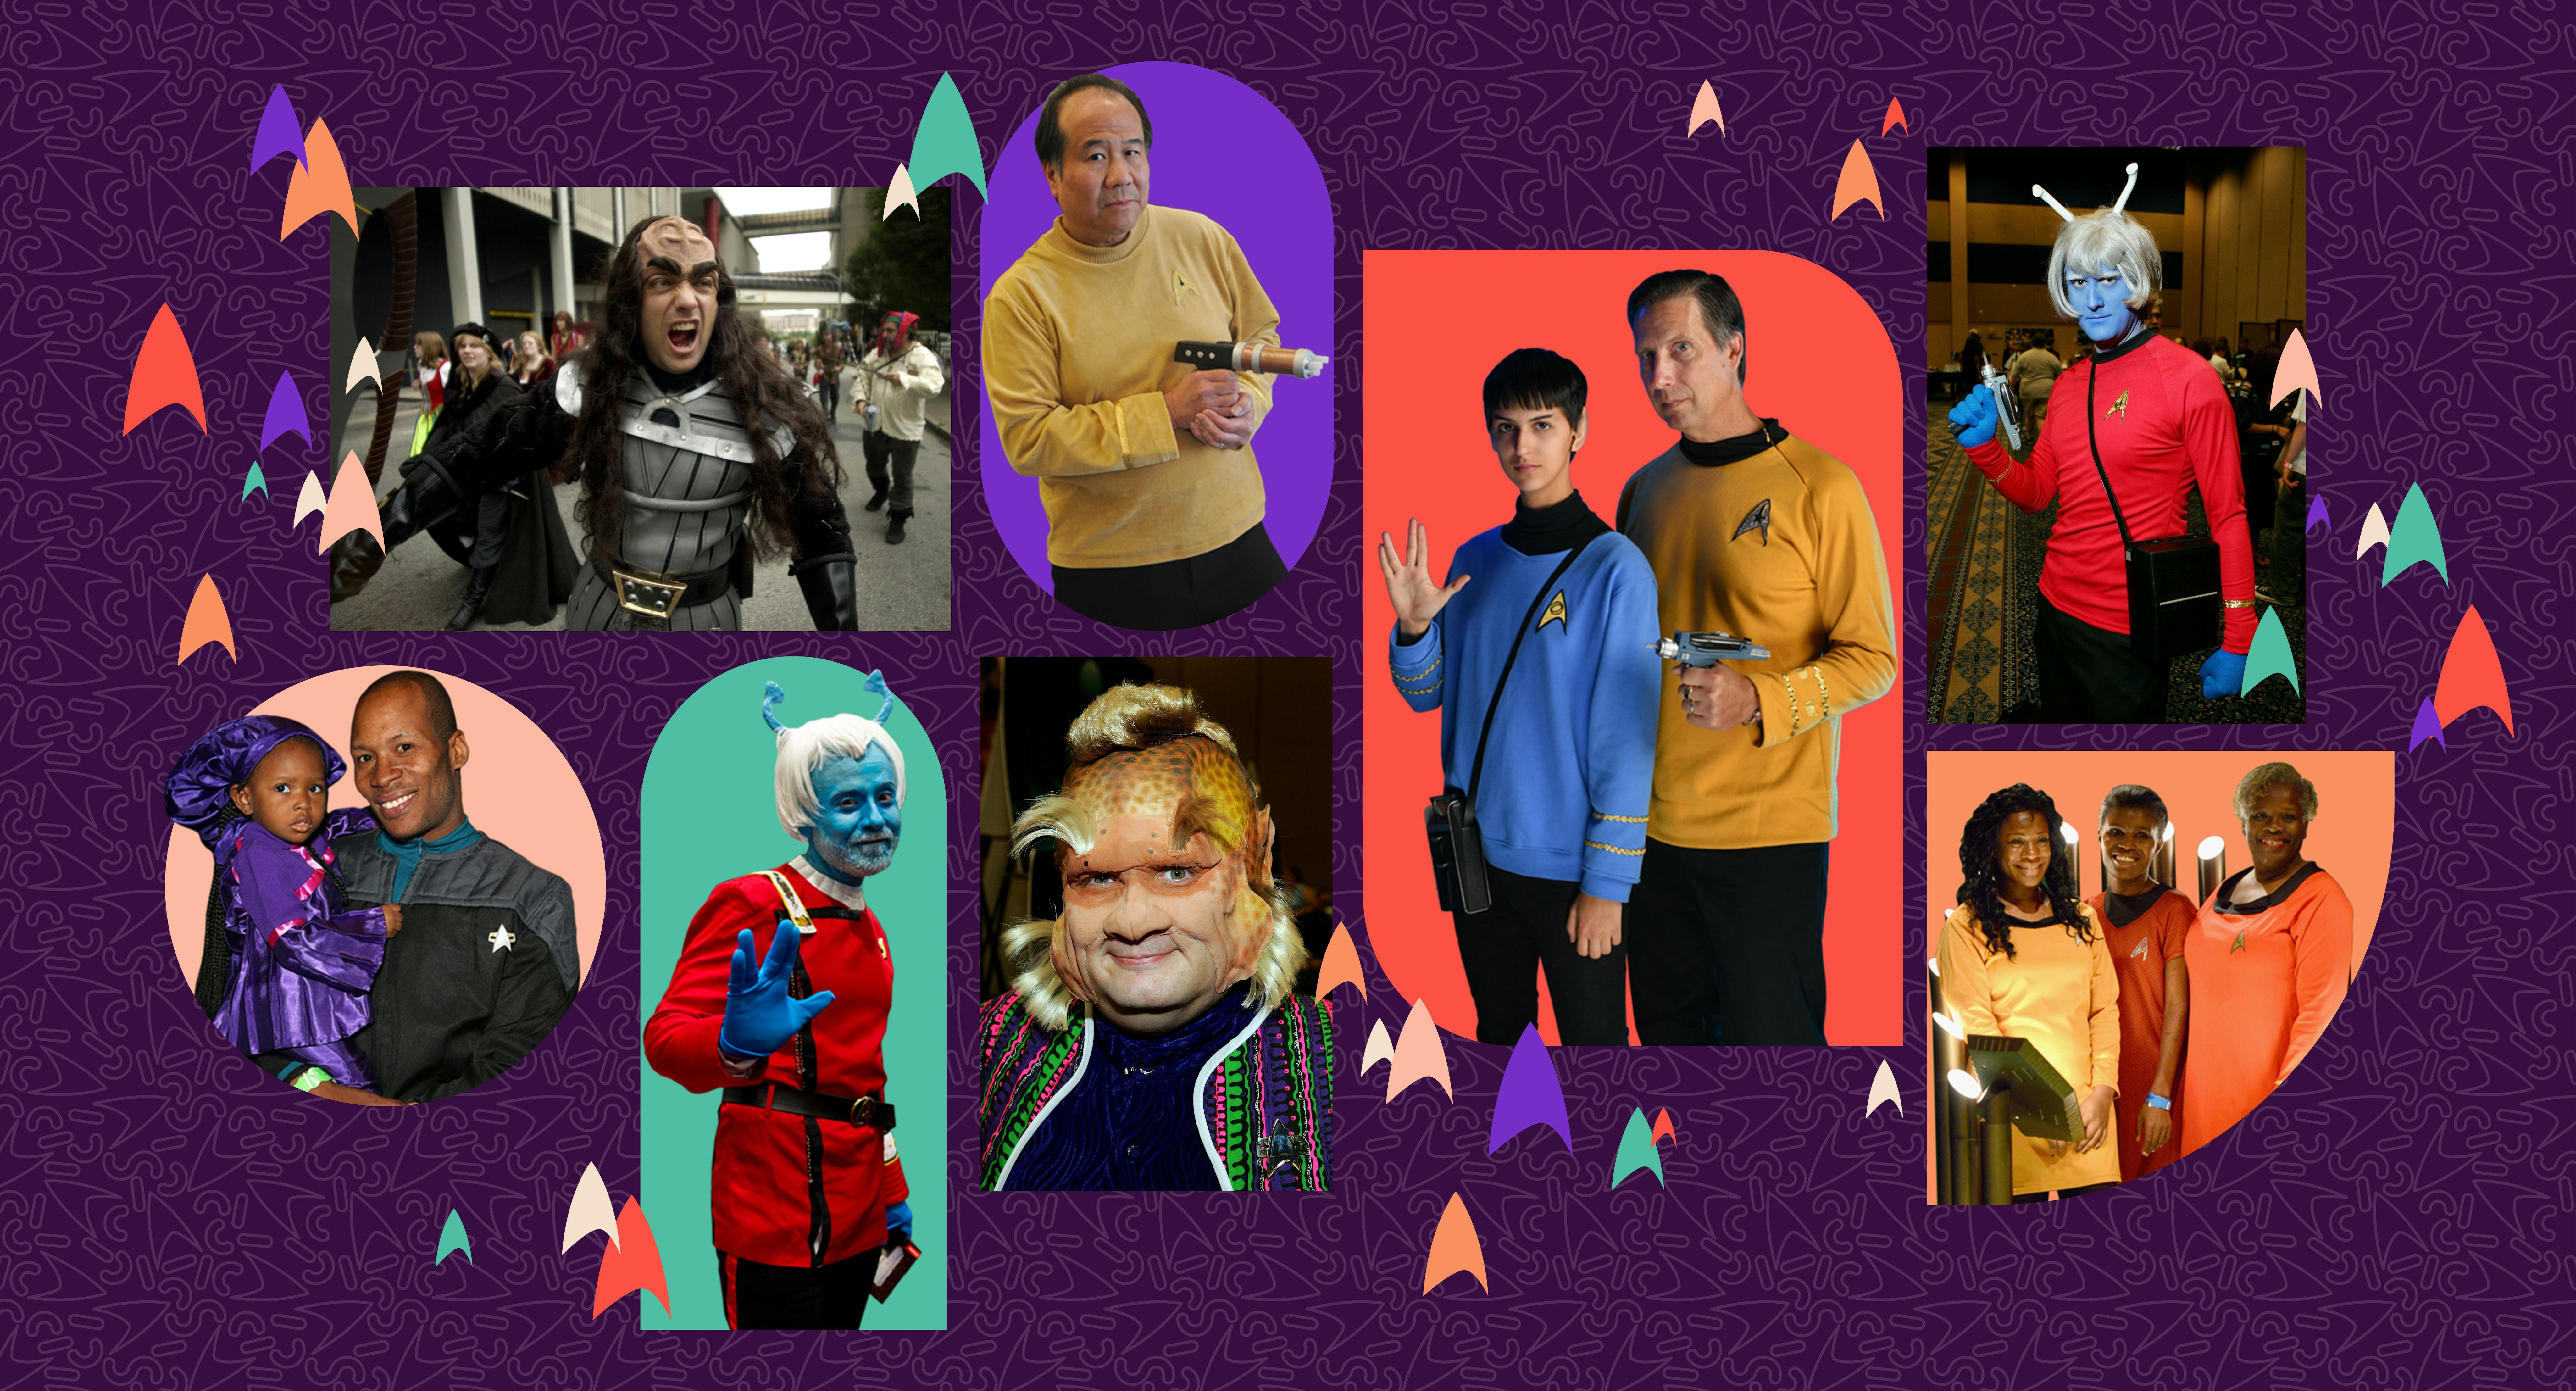 Photos of Star Trek cosplayers are arranged against a purple background.